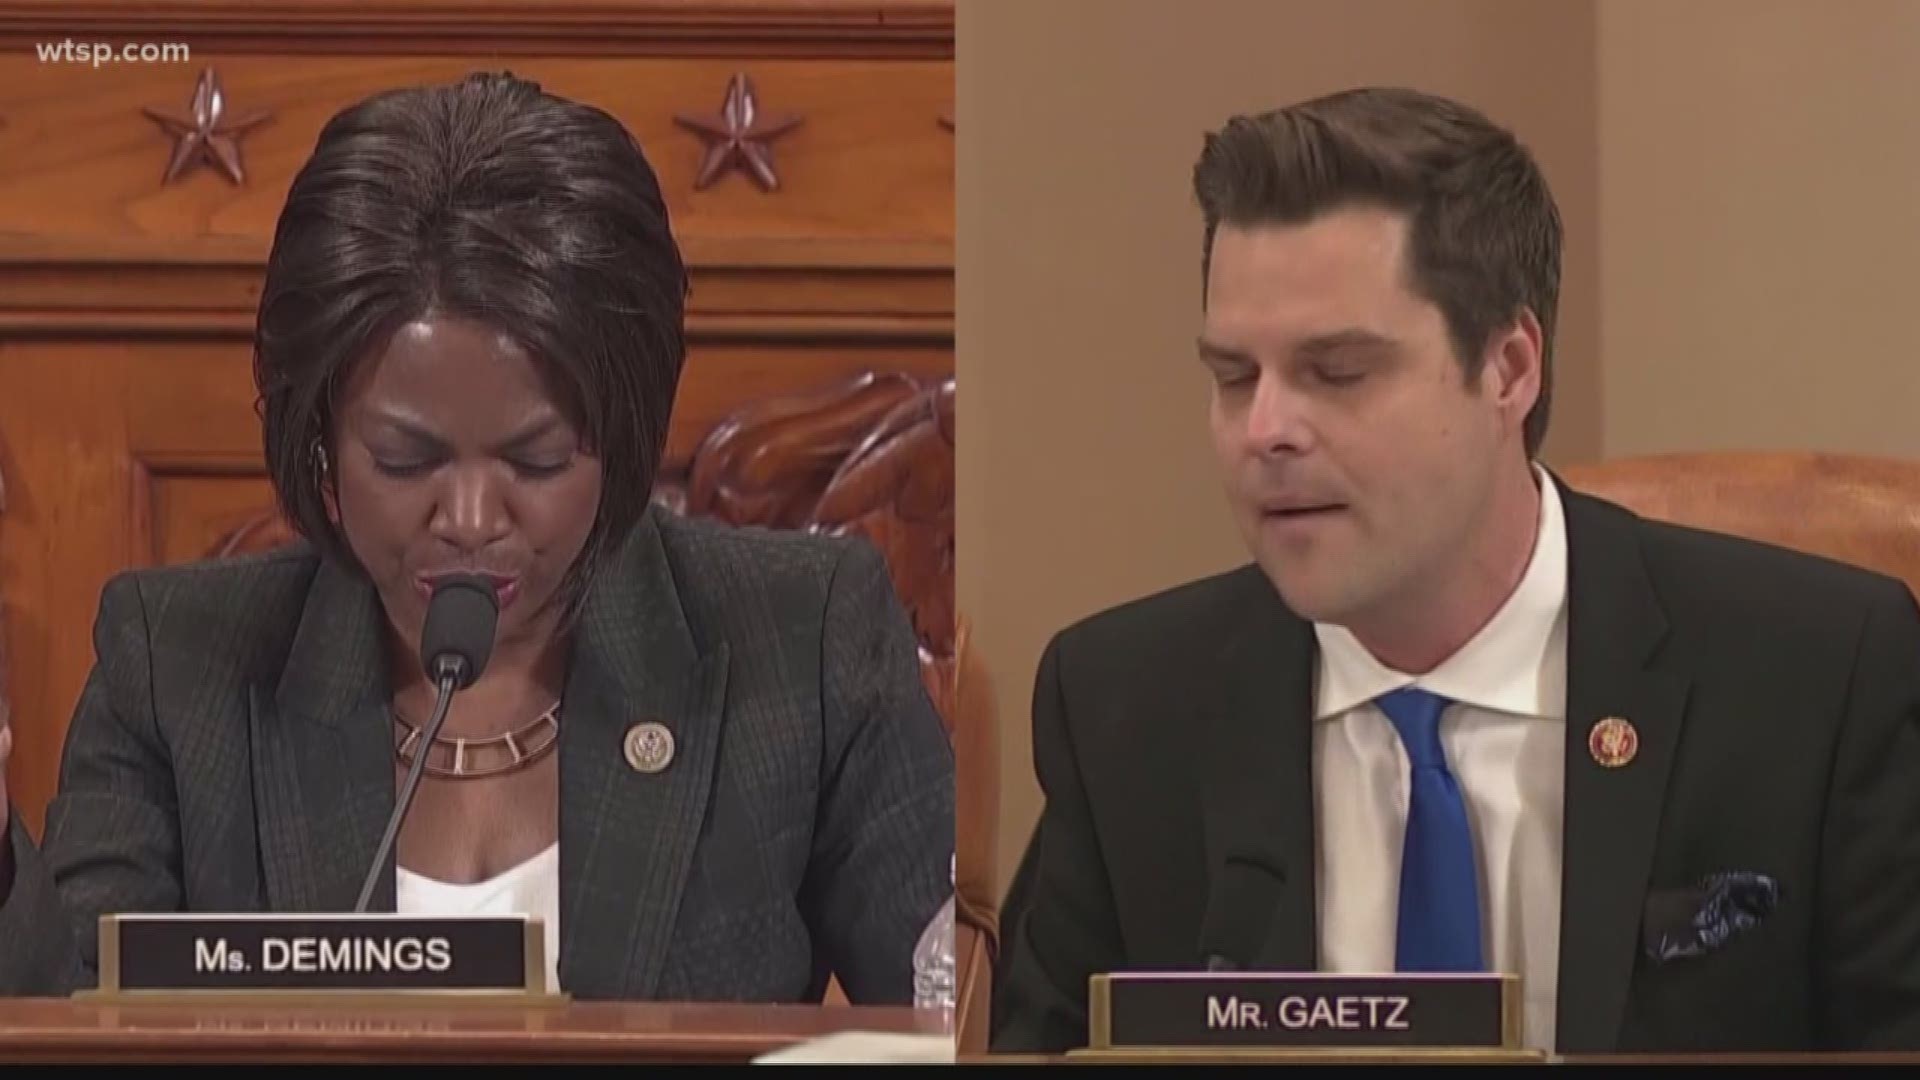 Rep. Val Demings Demings is a Democrat. Rep. Matt Gaetz is a Republican. They're both making big names for themselves in the country's largest political battle.